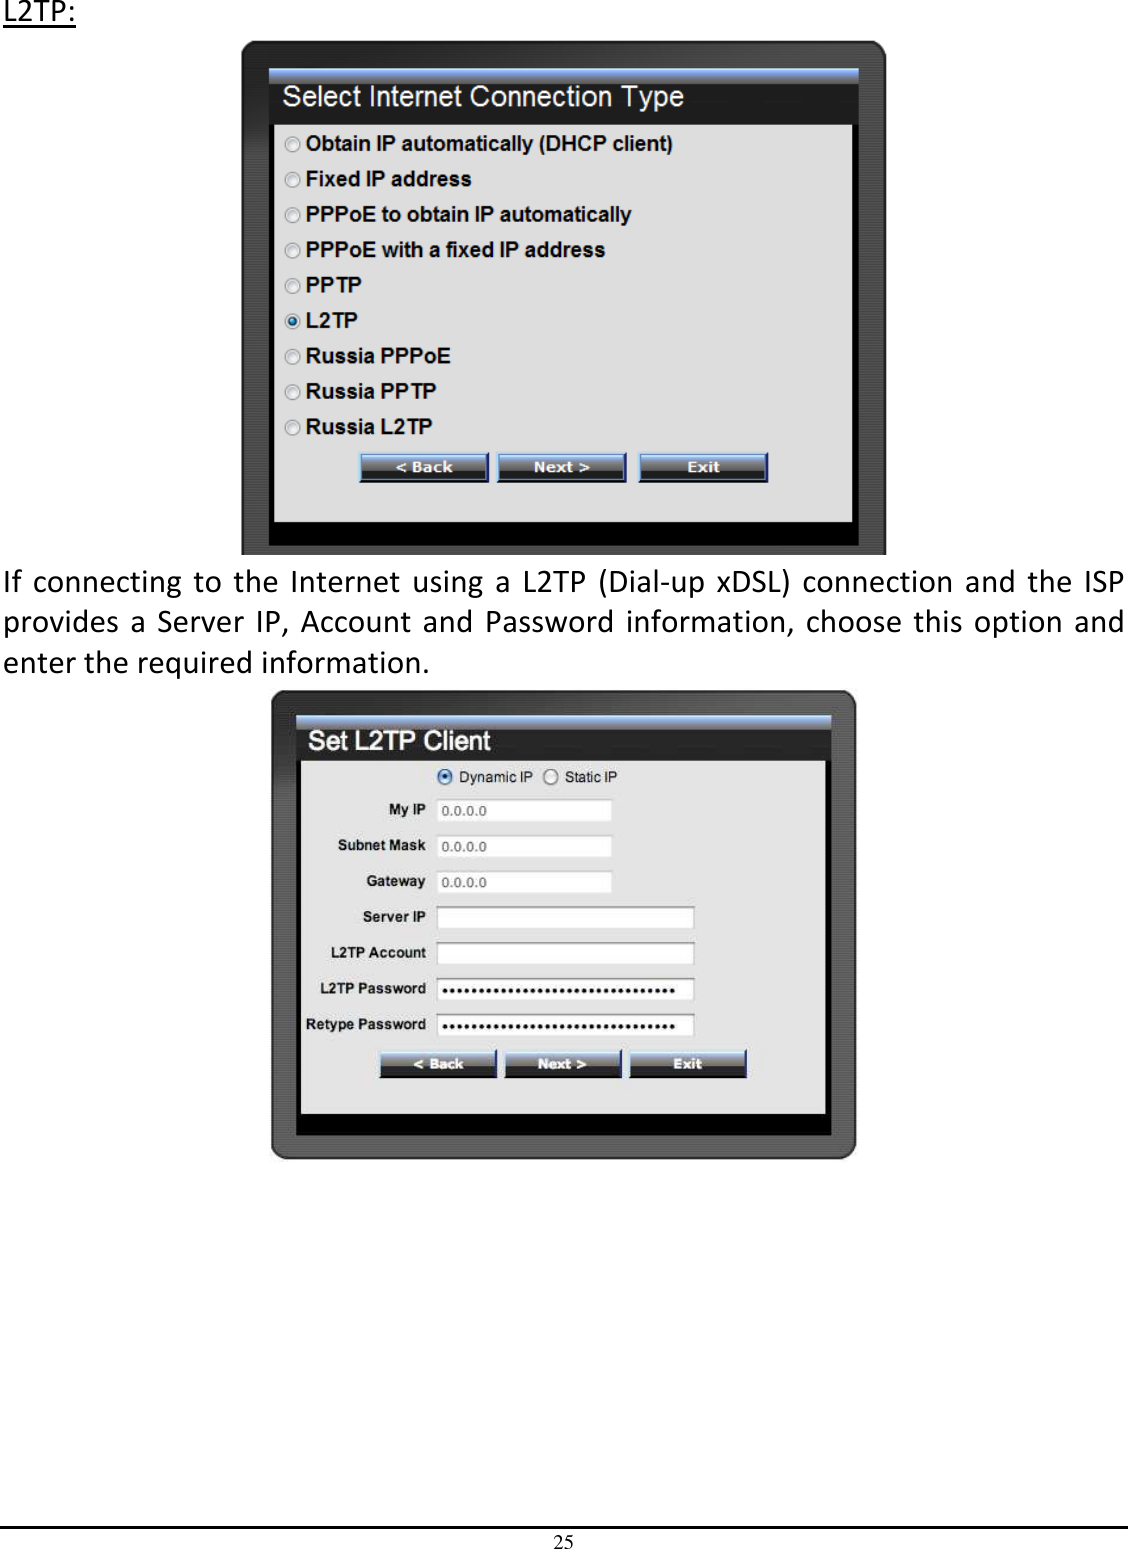 25 L2TP:  If connecting to the Internet using  a L2TP  (Dial-up xDSL) connection and the ISP provides a Server IP, Account and Password information, choose this option and enter the required information.  